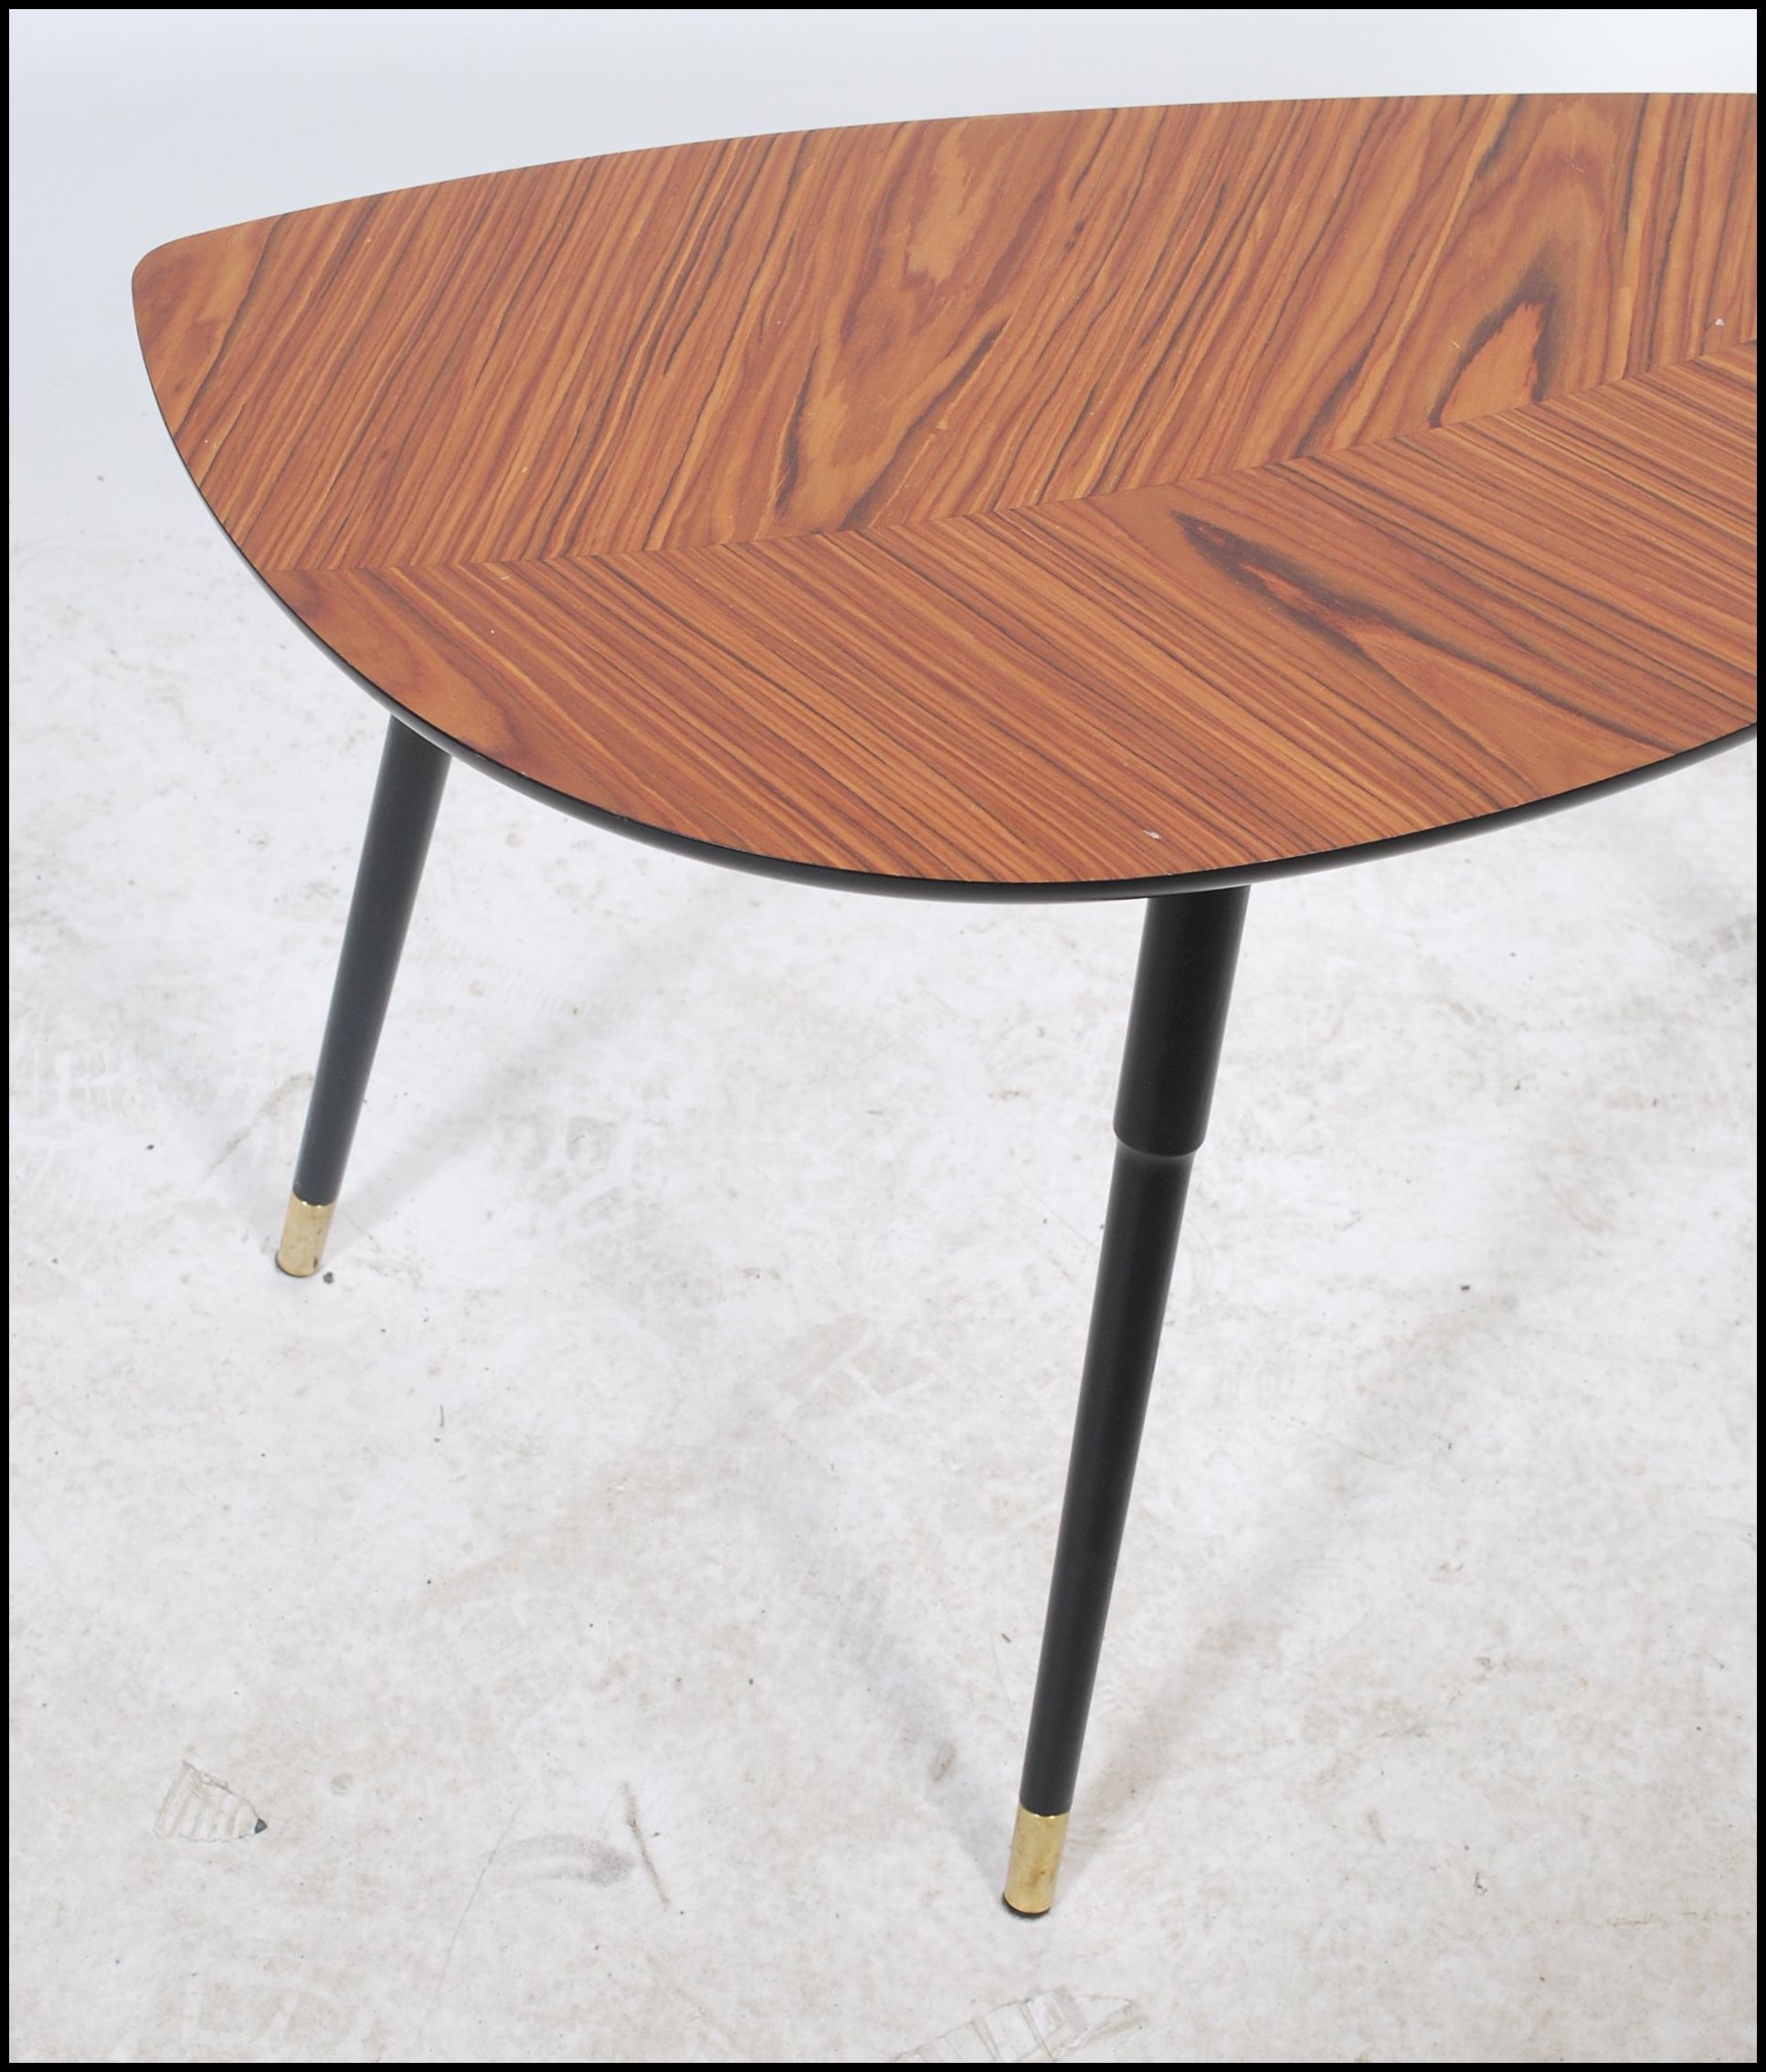 A vintage retro 20th century low tripod table having a leaf pattern top. The table raised on - Image 4 of 4